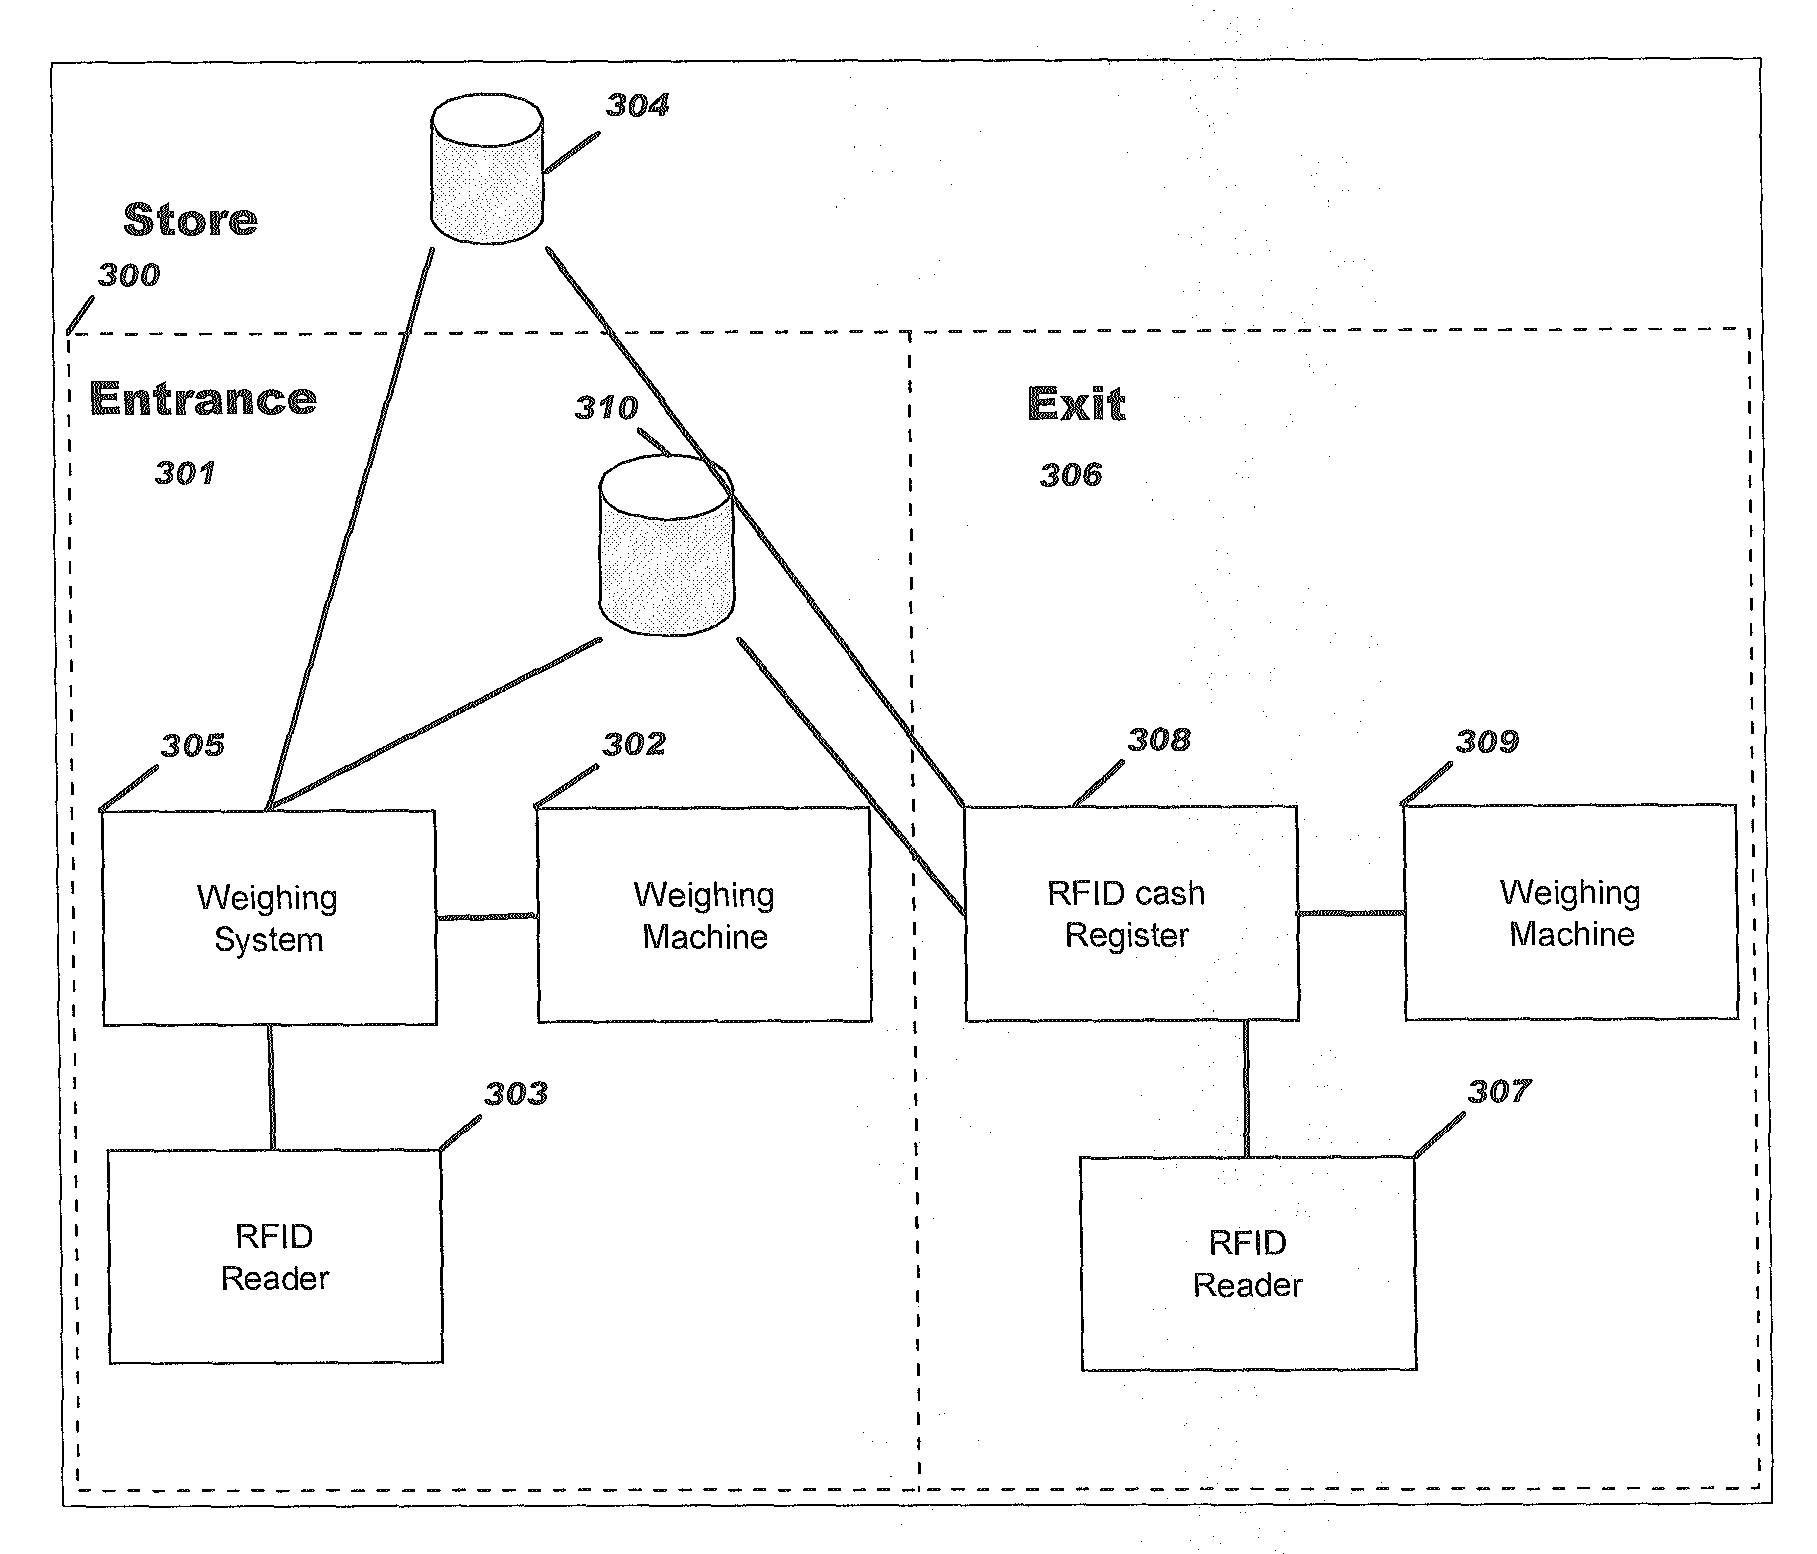 System For Facilitating The Handling Of Goods Based On Containers Equipped With An RFID Tag